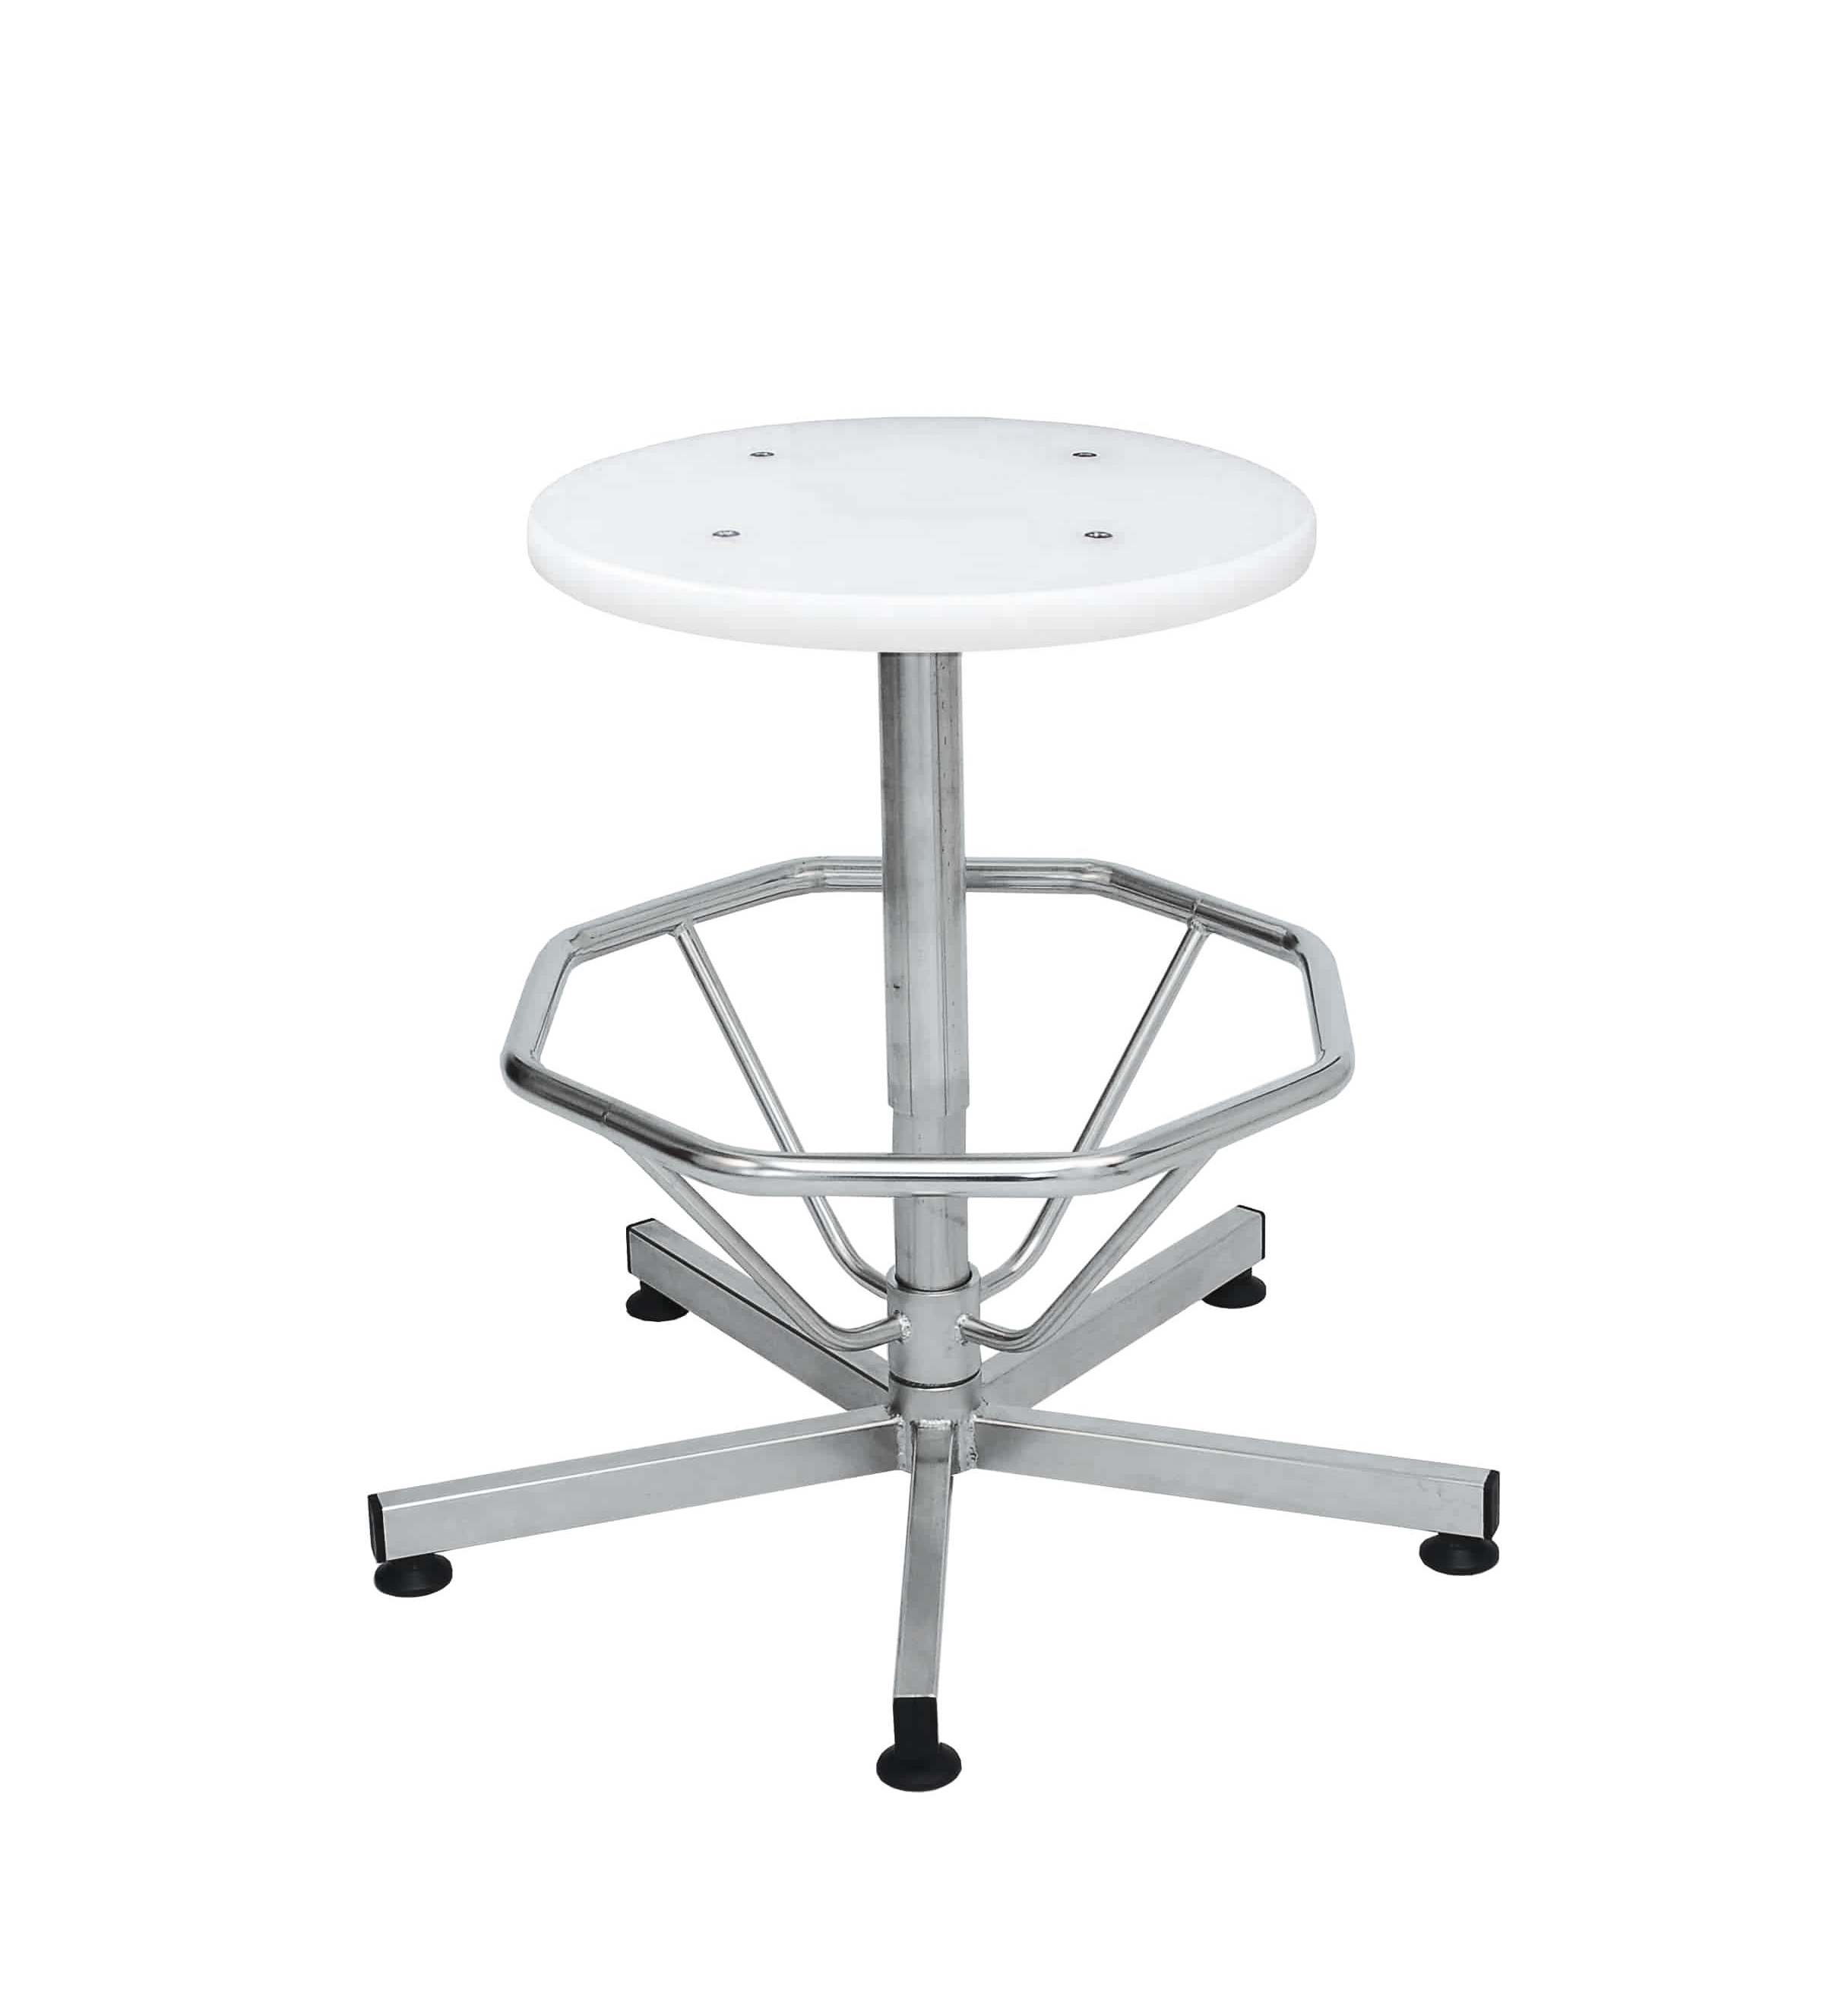 V-korr autoclave stool with foot ring